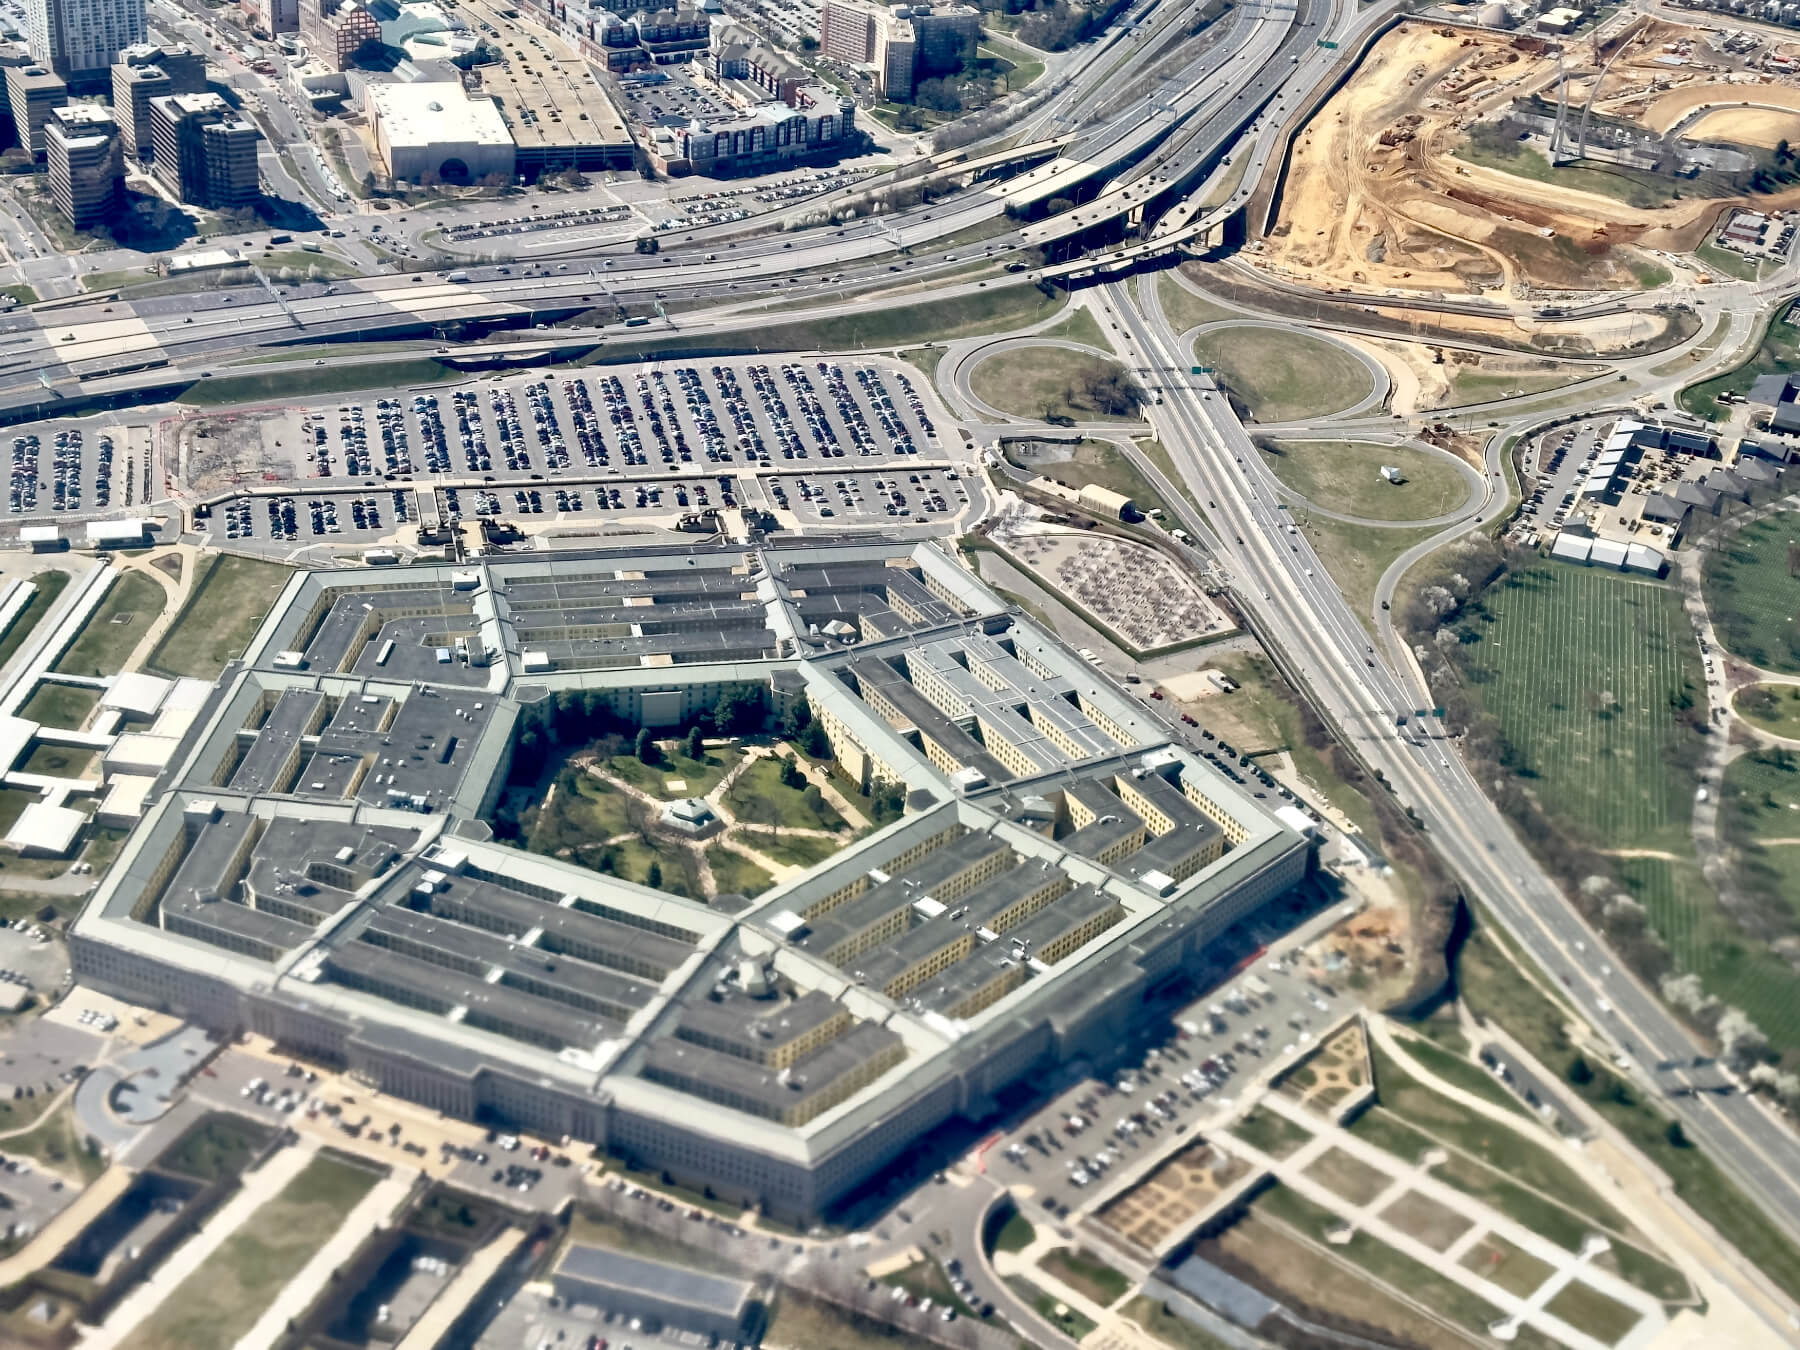 The Pentagon, the headquarters of the U.S. Department of Defense.